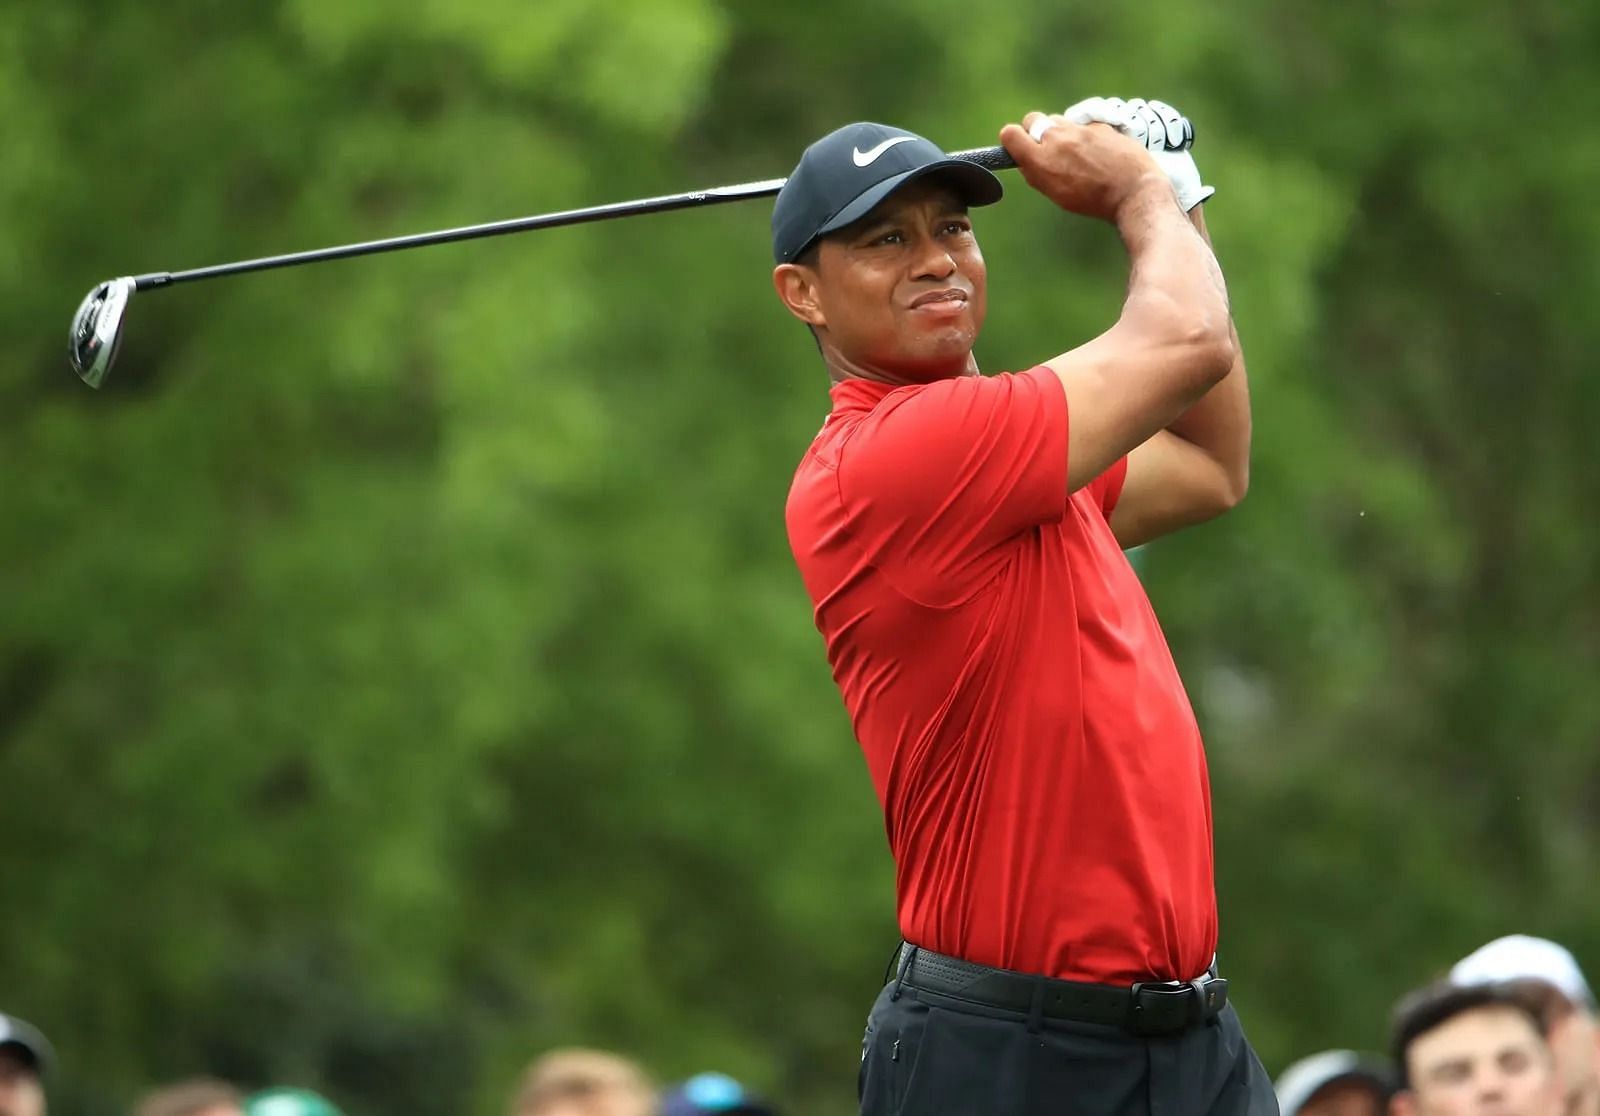 Tiger Wood playing a shot ( Image Source: Andrew Redington/Getty Images Sport)